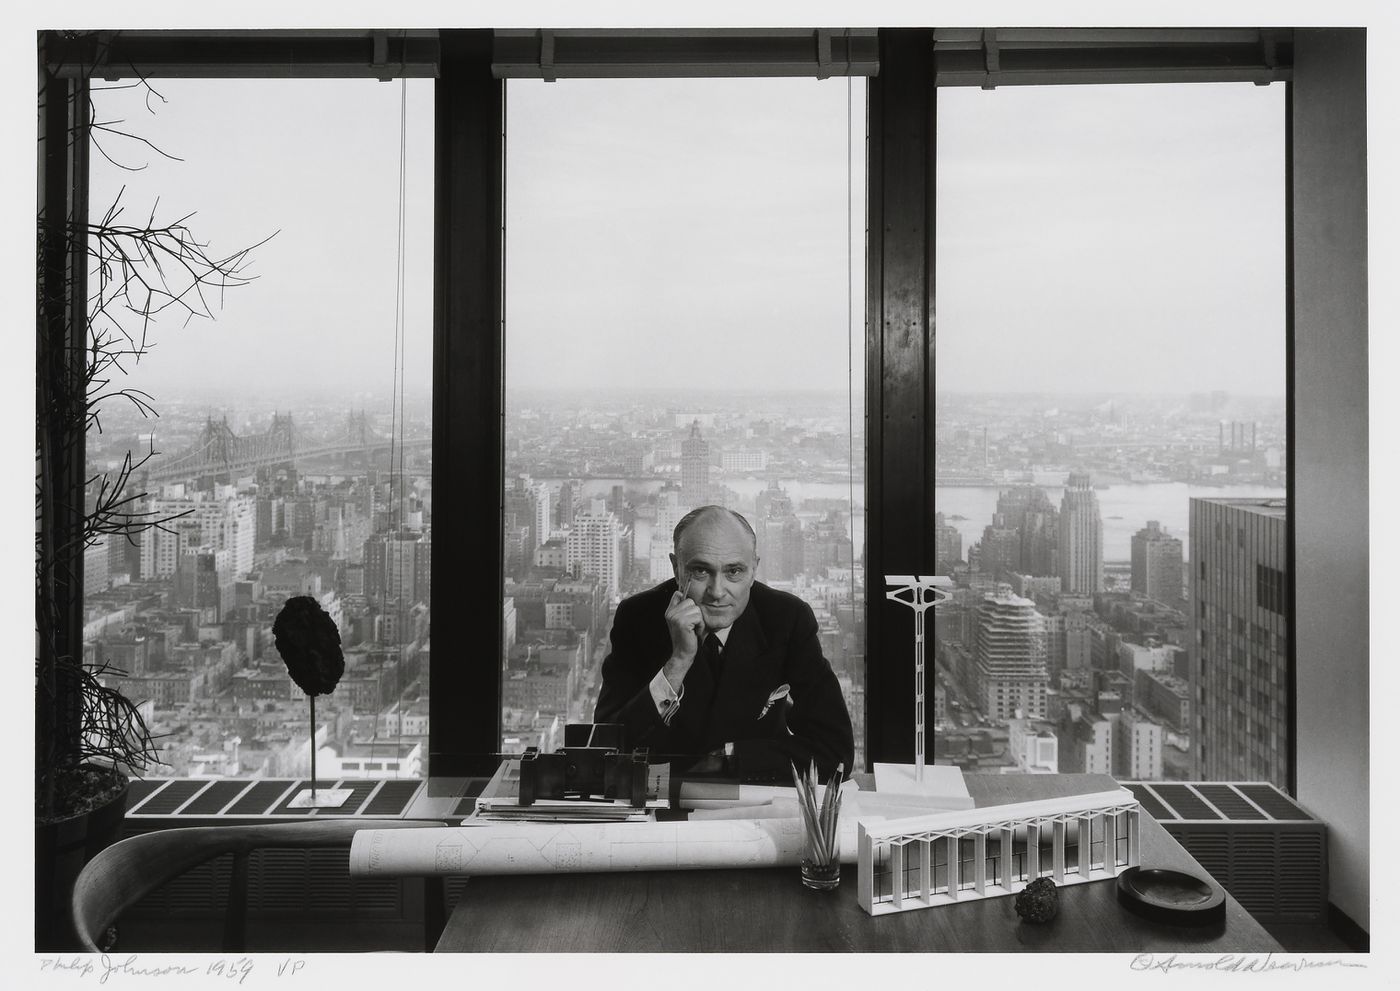 Portrait of Philip Johnson at his desk in the Seagram Building with a view of buildings and the East River in the background, New York City